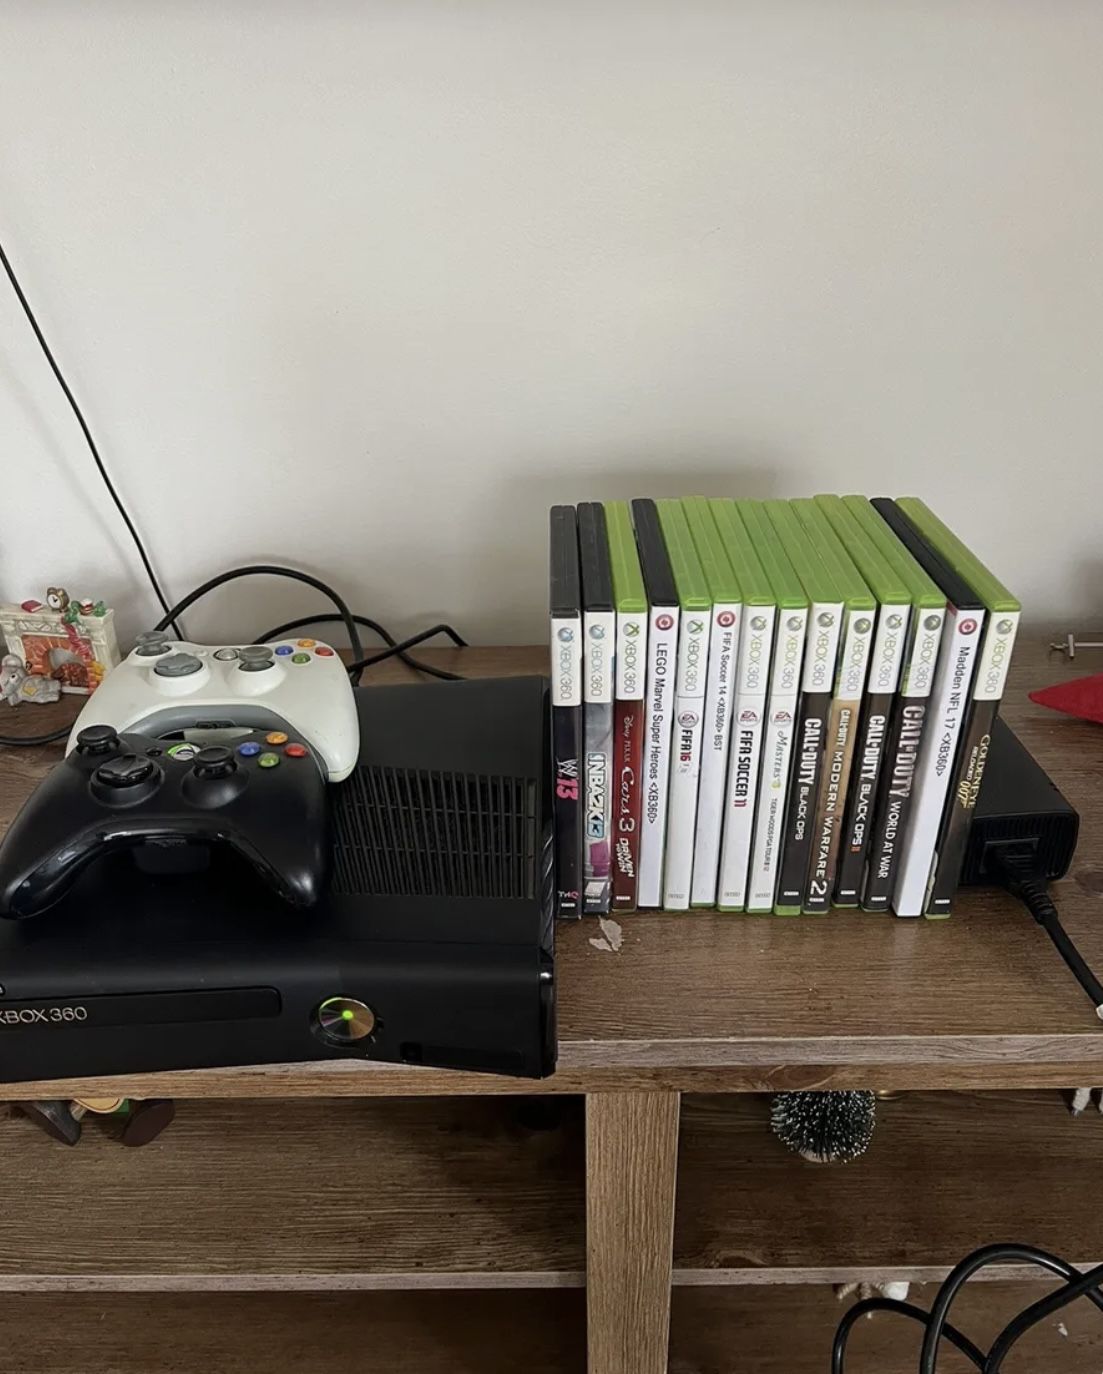 Xbox 360 All Games Included 